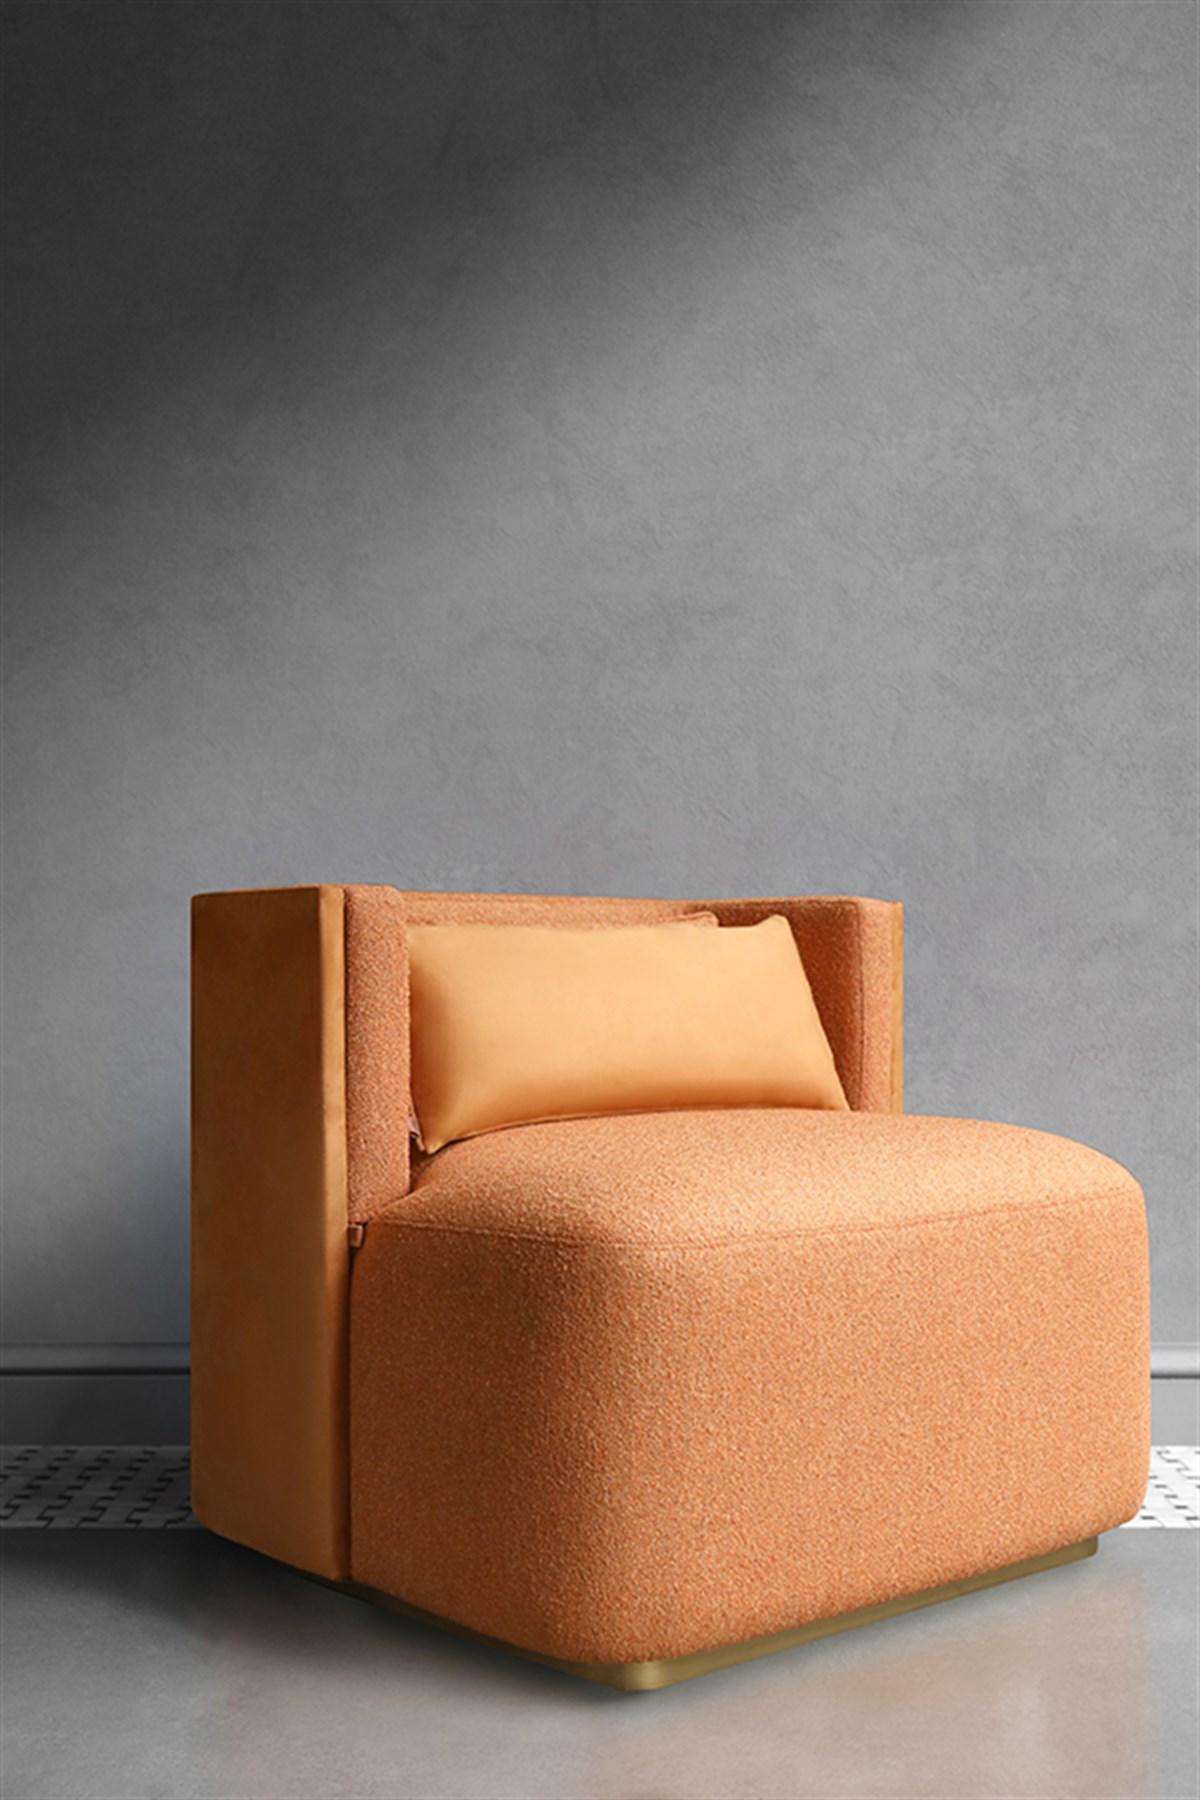 Papillonne ustard armchair by Lagu
Designed by Ufuk Ceylan
Dimensions: W 80 x D 72 x H 73 cm
Materials: Bouclé, Foam, Hardwood, Metal, Upholstery.

The papillonne mustard armchair complements your style with its flawless form and unmatched